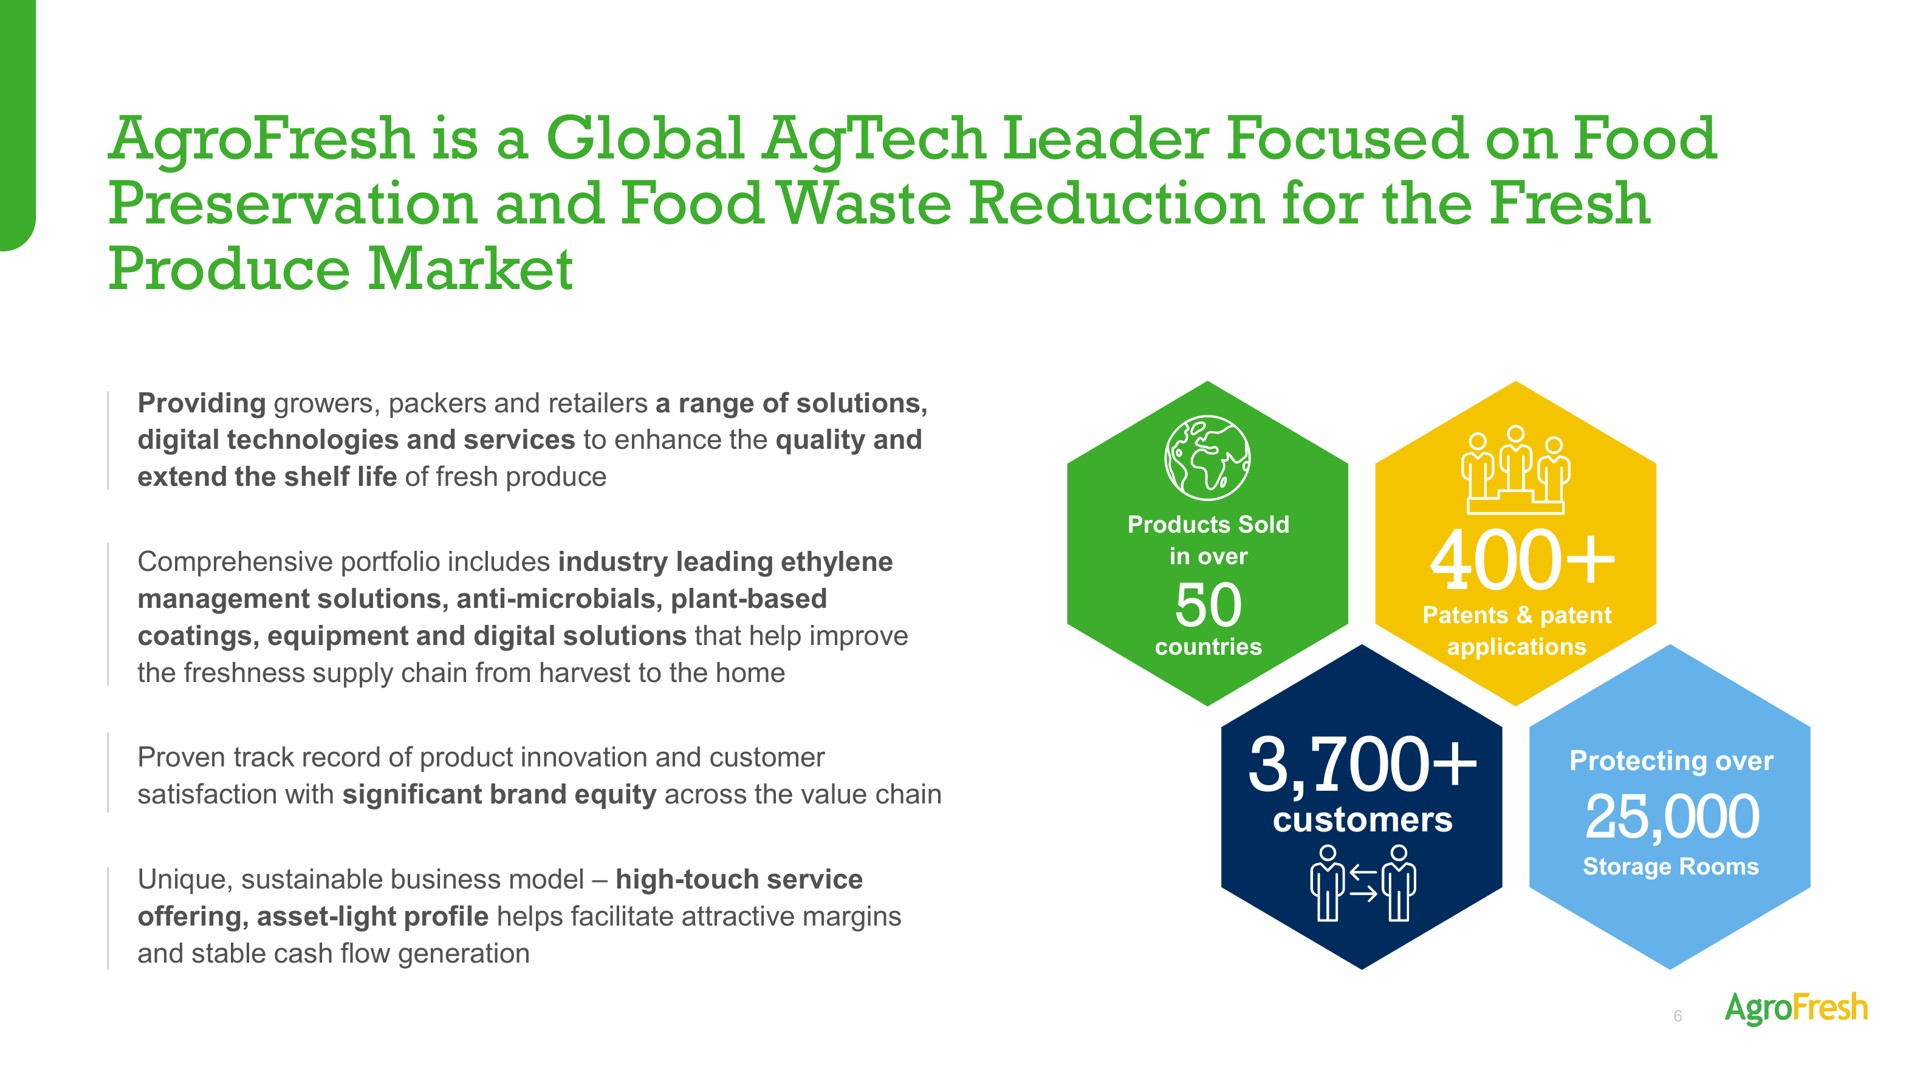 is a global leader focused on food preservation and food waste reduction for the fresh produce market | AgroFresh